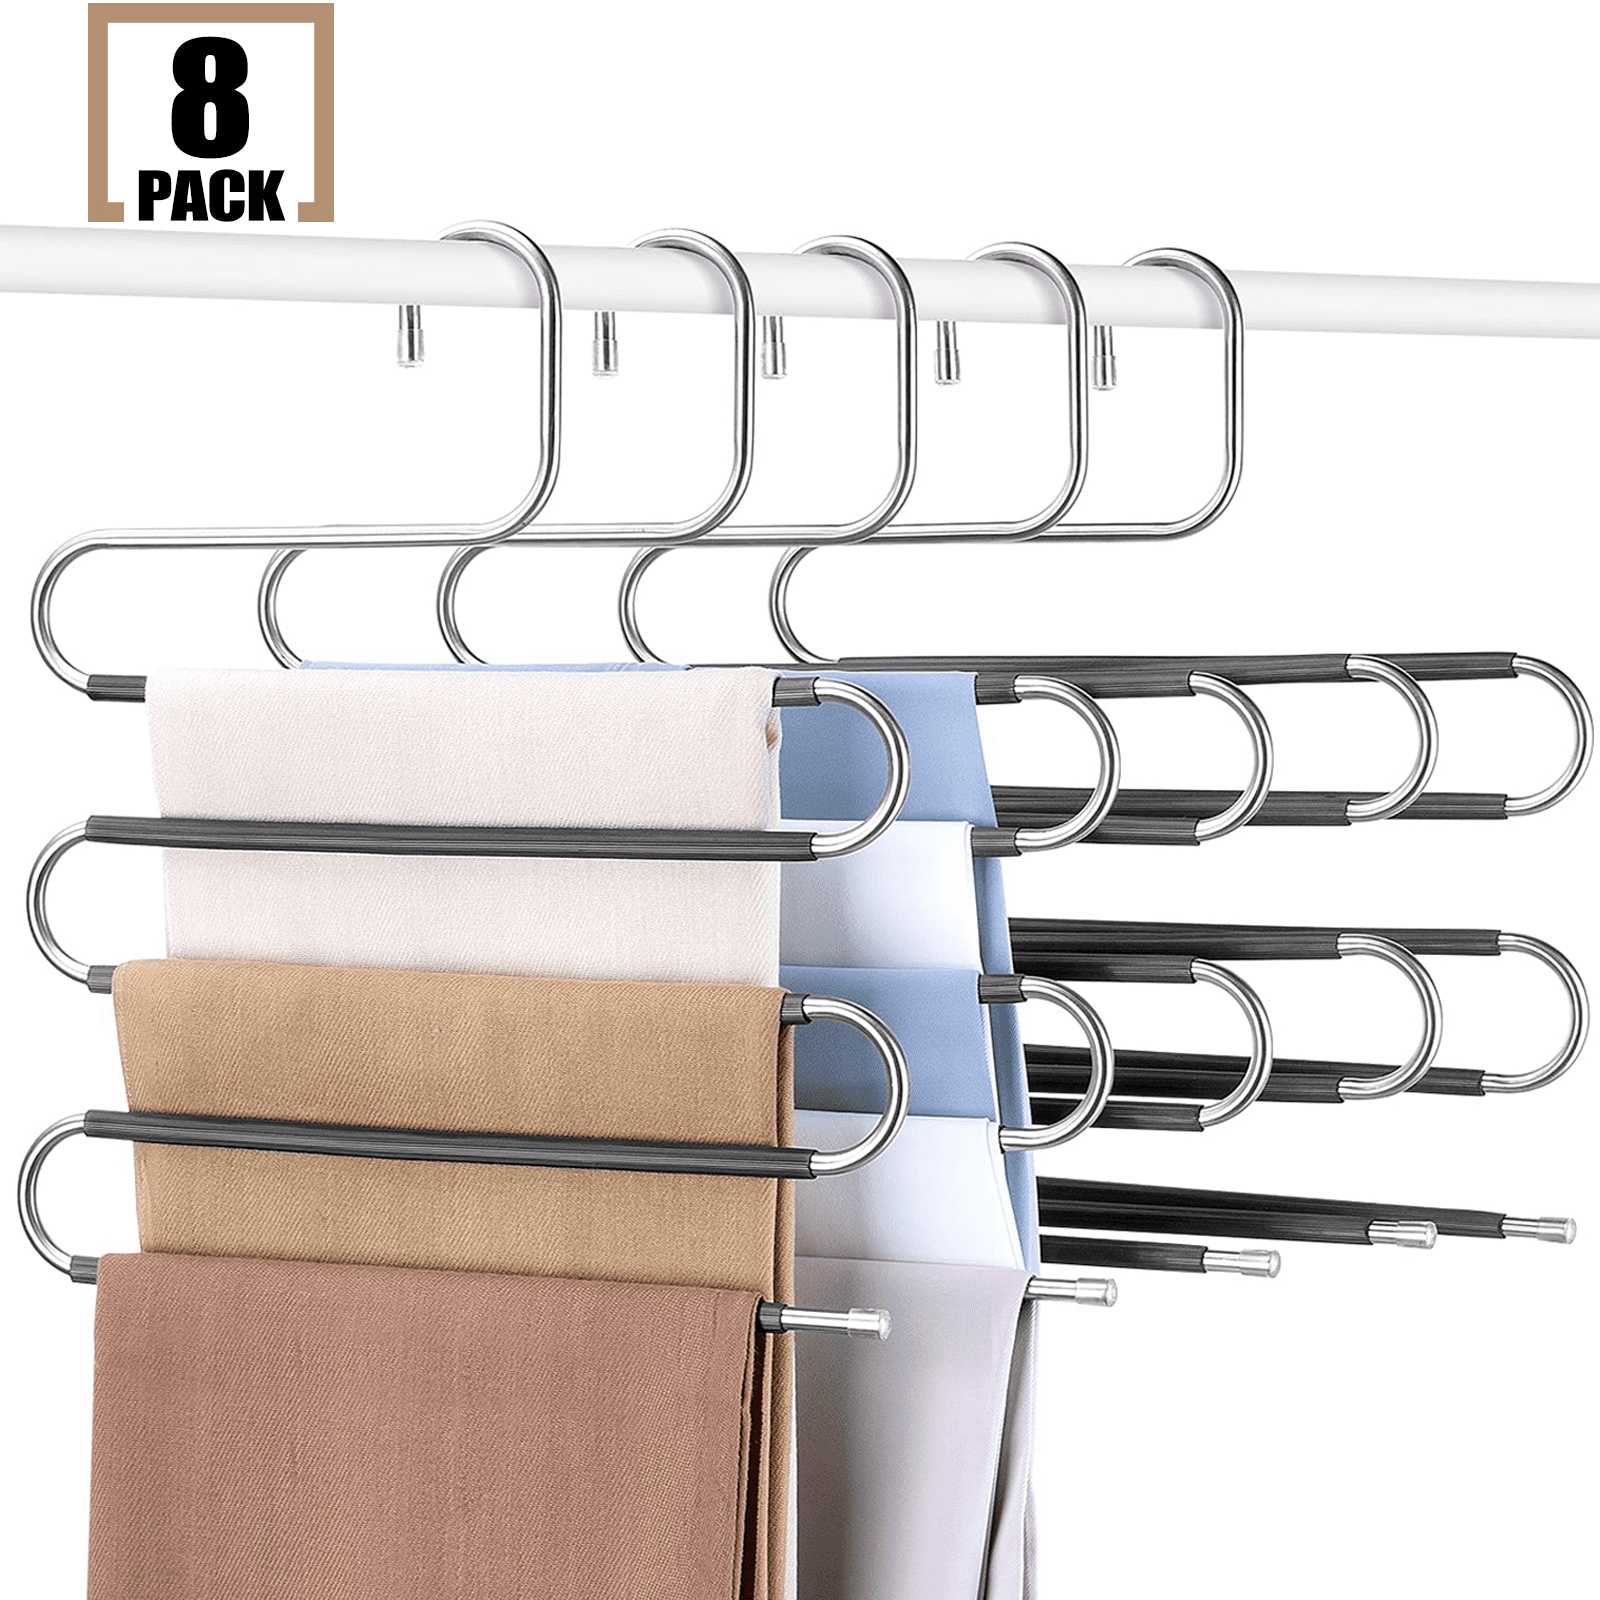 Pants Hangers Space Saving 8 Pack, 5 Layer Stainless Steel S-Shape Jeans Trousers Hangers, Greentro Closet Storage Organizer for Pants Jeans Scarf Hanging